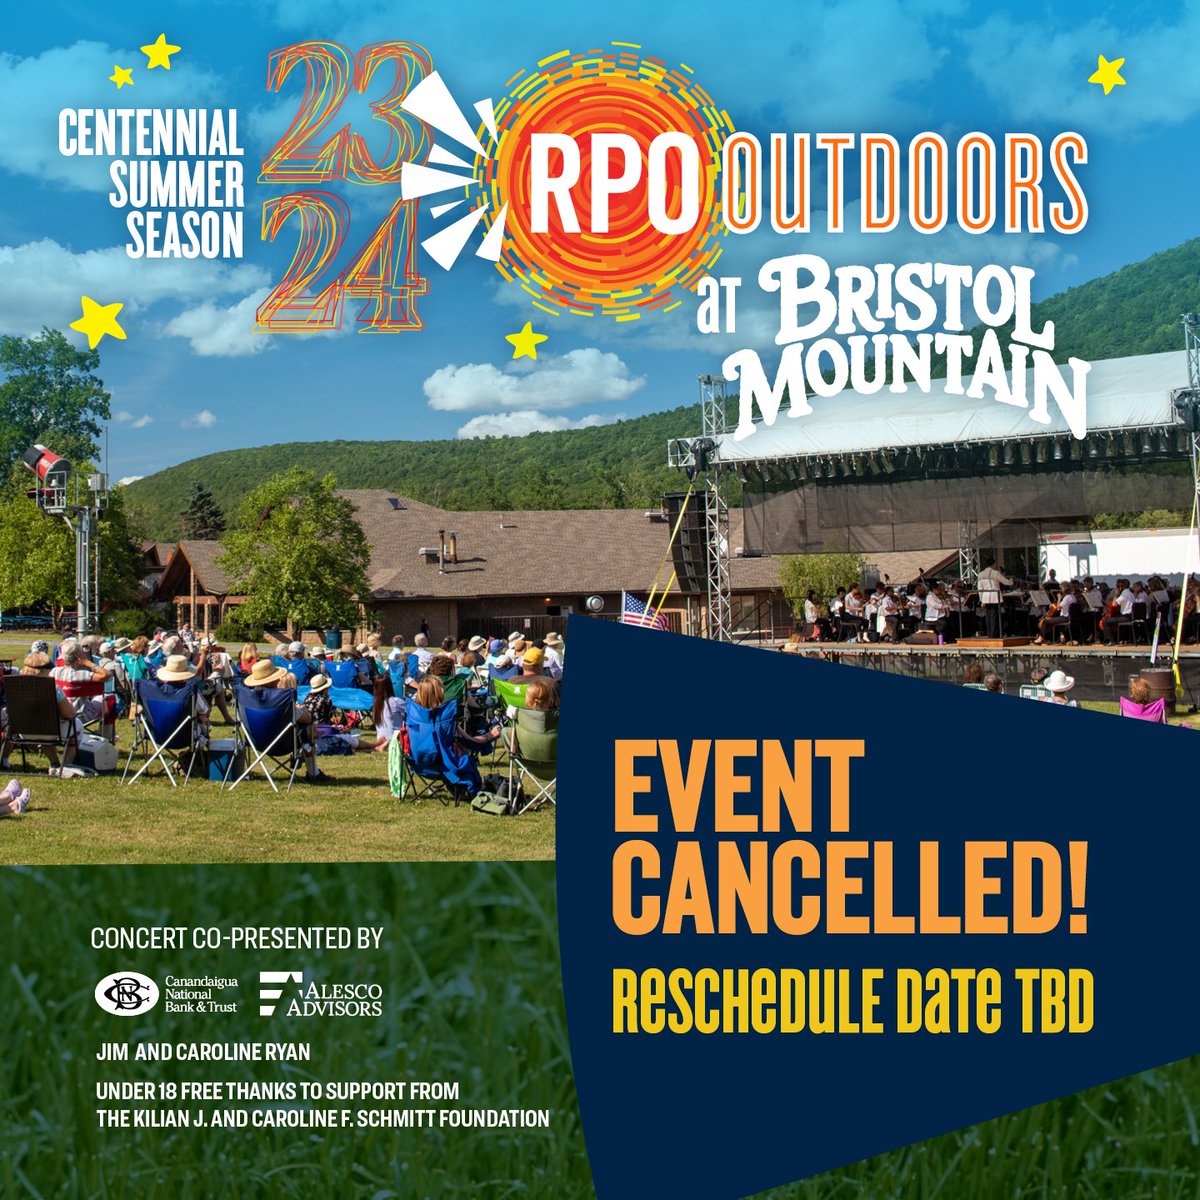 RPO@Bristol Mountain, set for July 13, has been CANCELLED due to heavy rainfall in the Canandaigua area. A reschedule date is TBD. Tickets purchased for the concert may be returned for a refund by contacting RPO Patron Services at 585-454-2100 or patronservices@rpo.org.